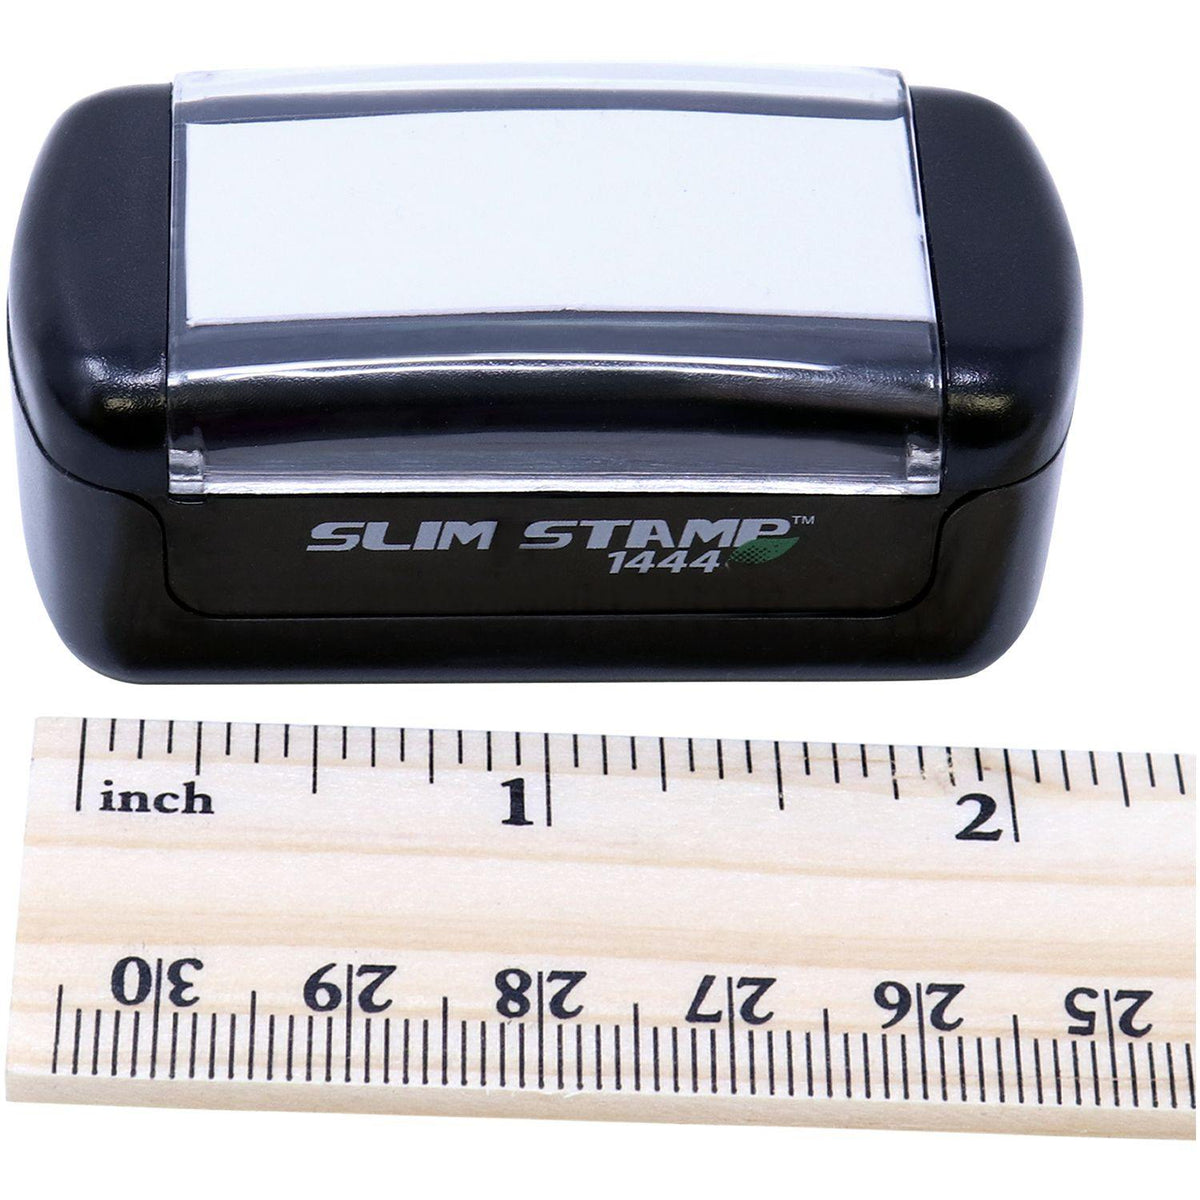 Measurement Slim Pre-Inked Posted with Thumbtack Stamp with Ruler